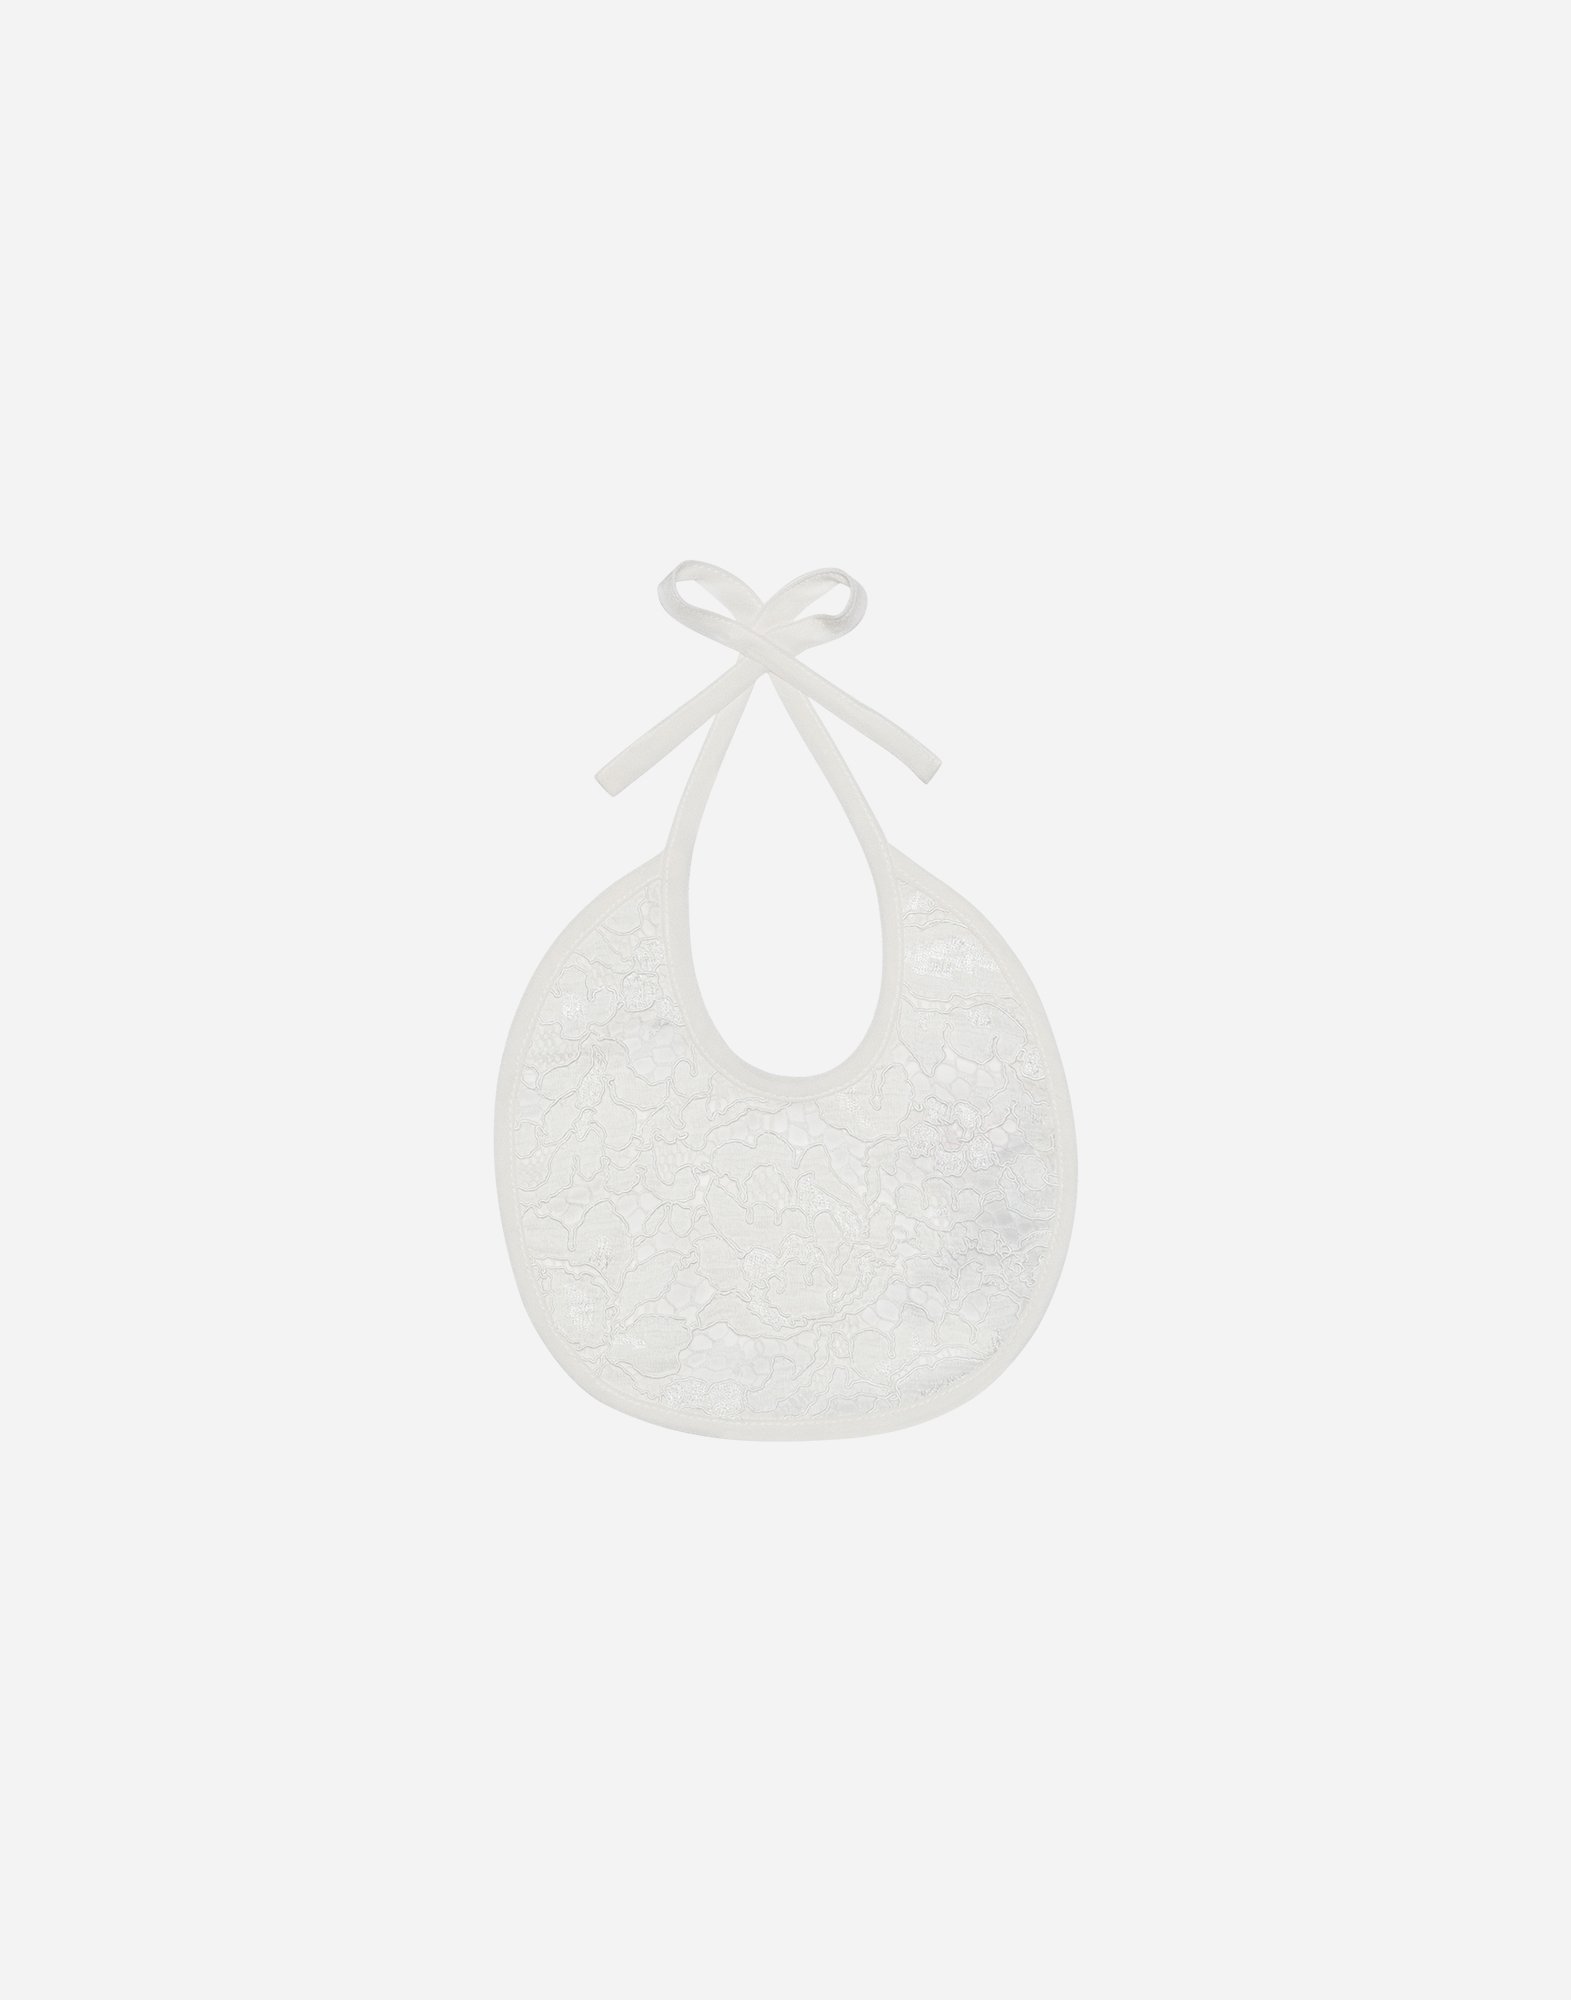 Galloon lace bib in White